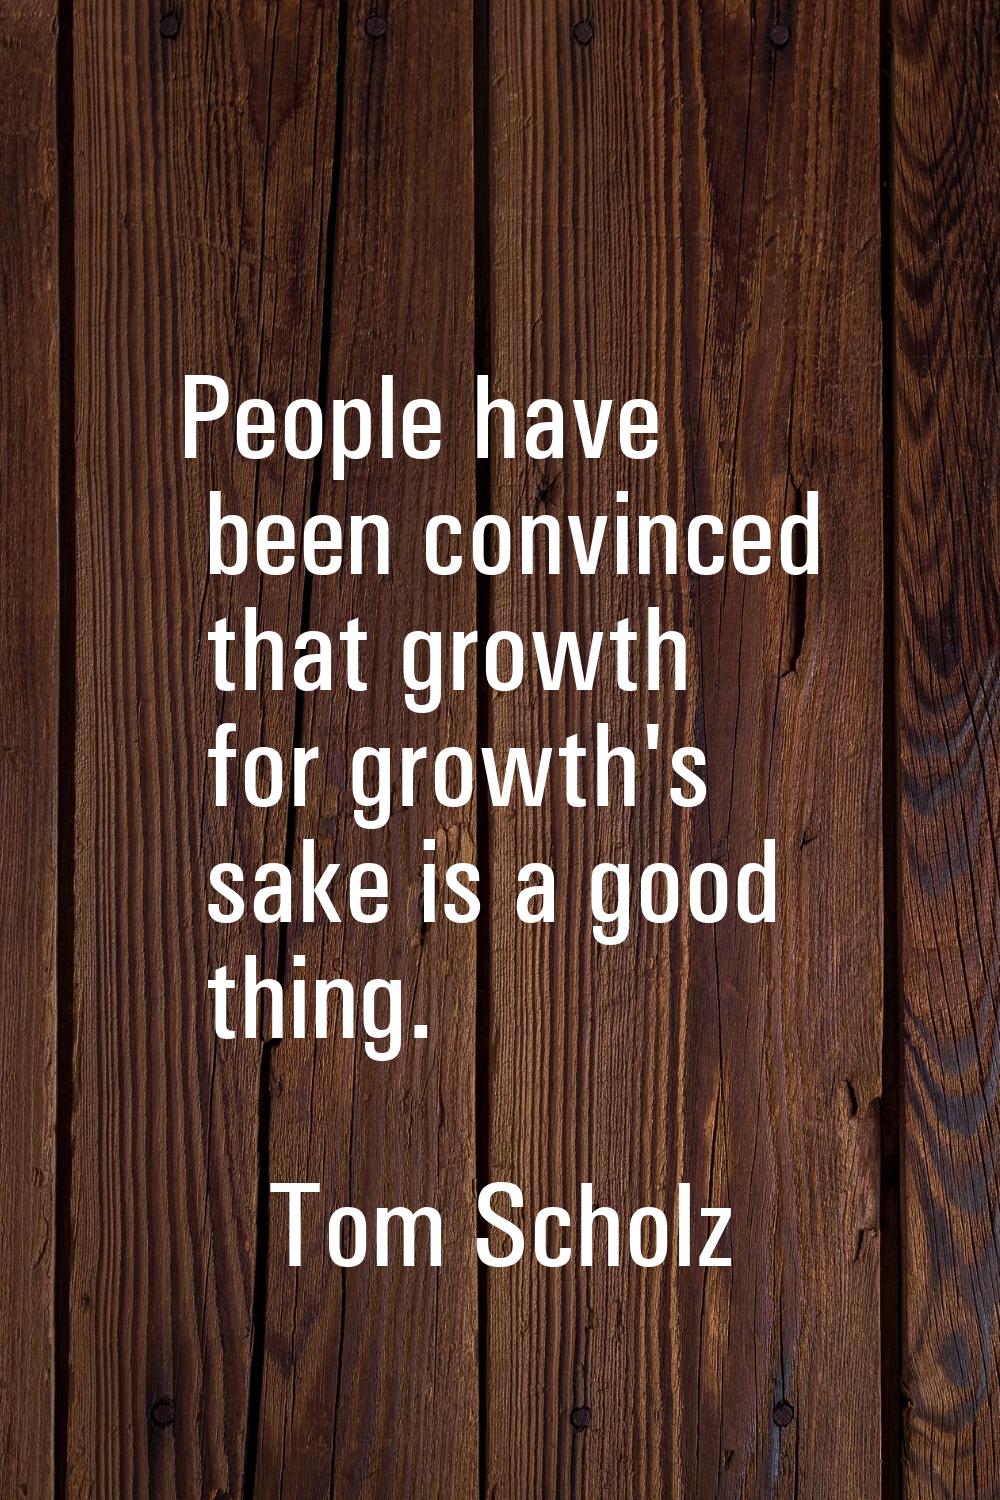 People have been convinced that growth for growth's sake is a good thing.